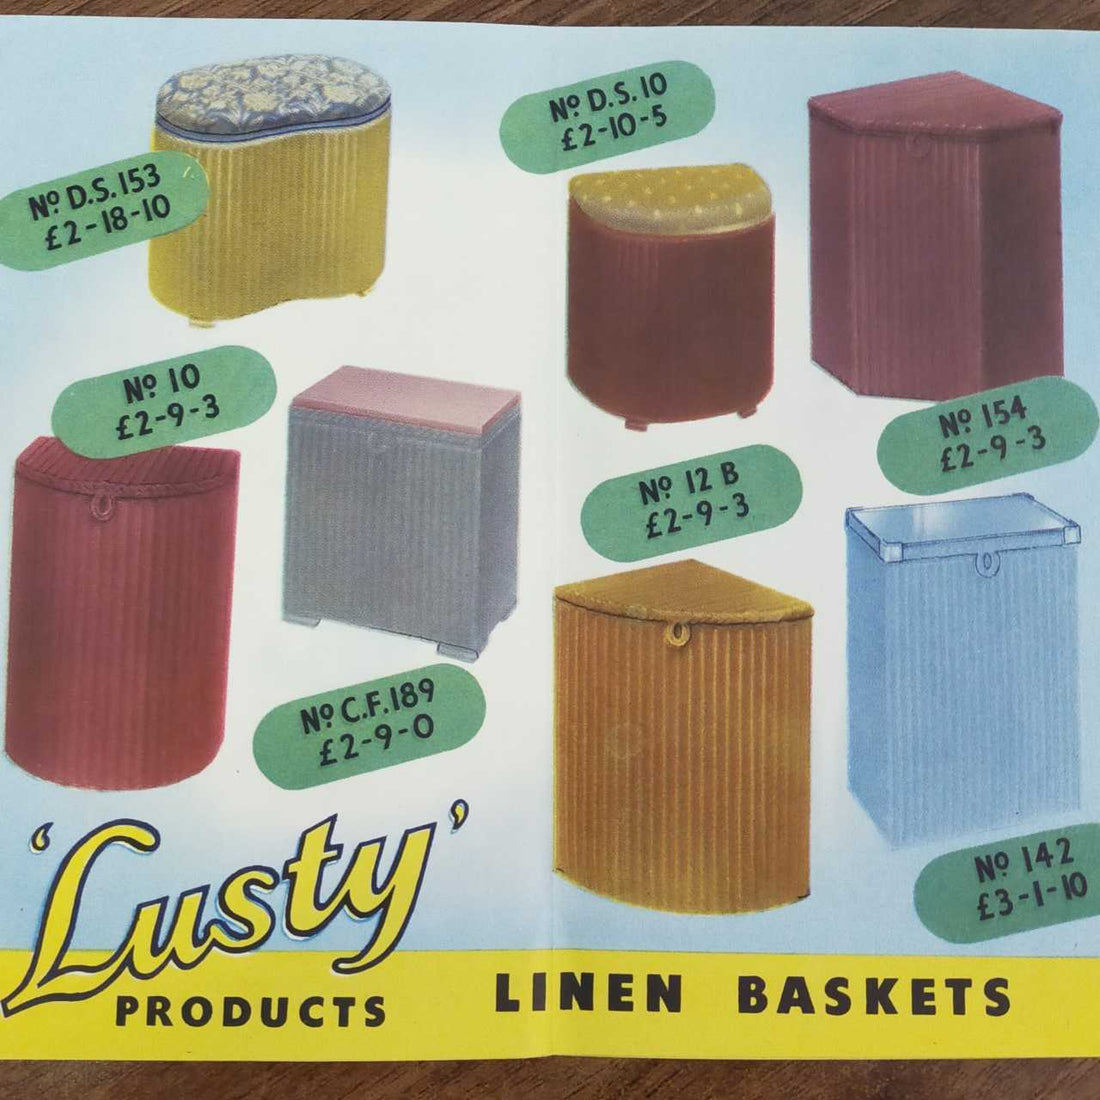 History of Lloyd Loom Linen Baskets from the 1920s to the 2020s